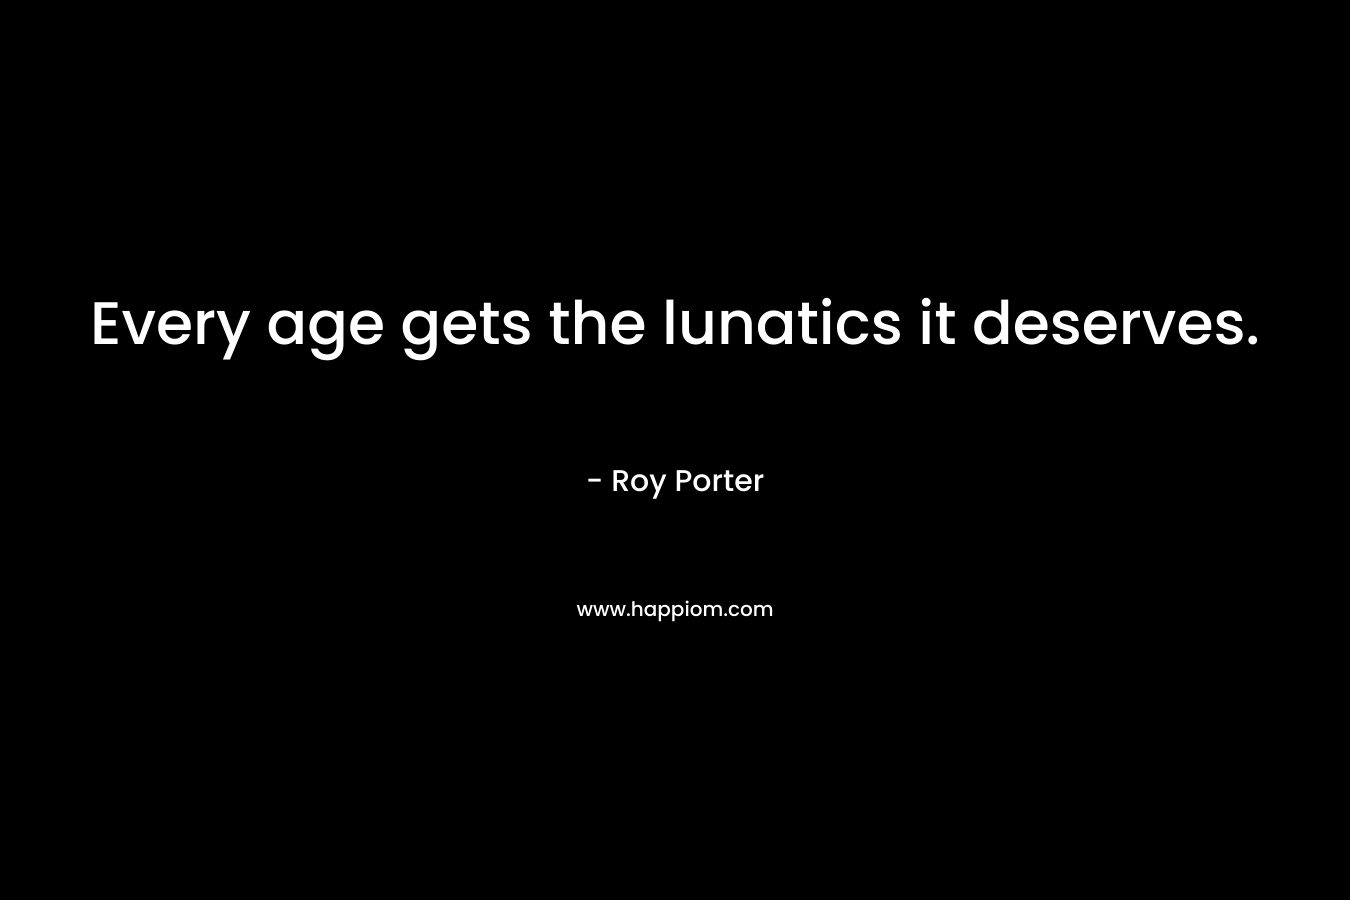 Every age gets the lunatics it deserves.